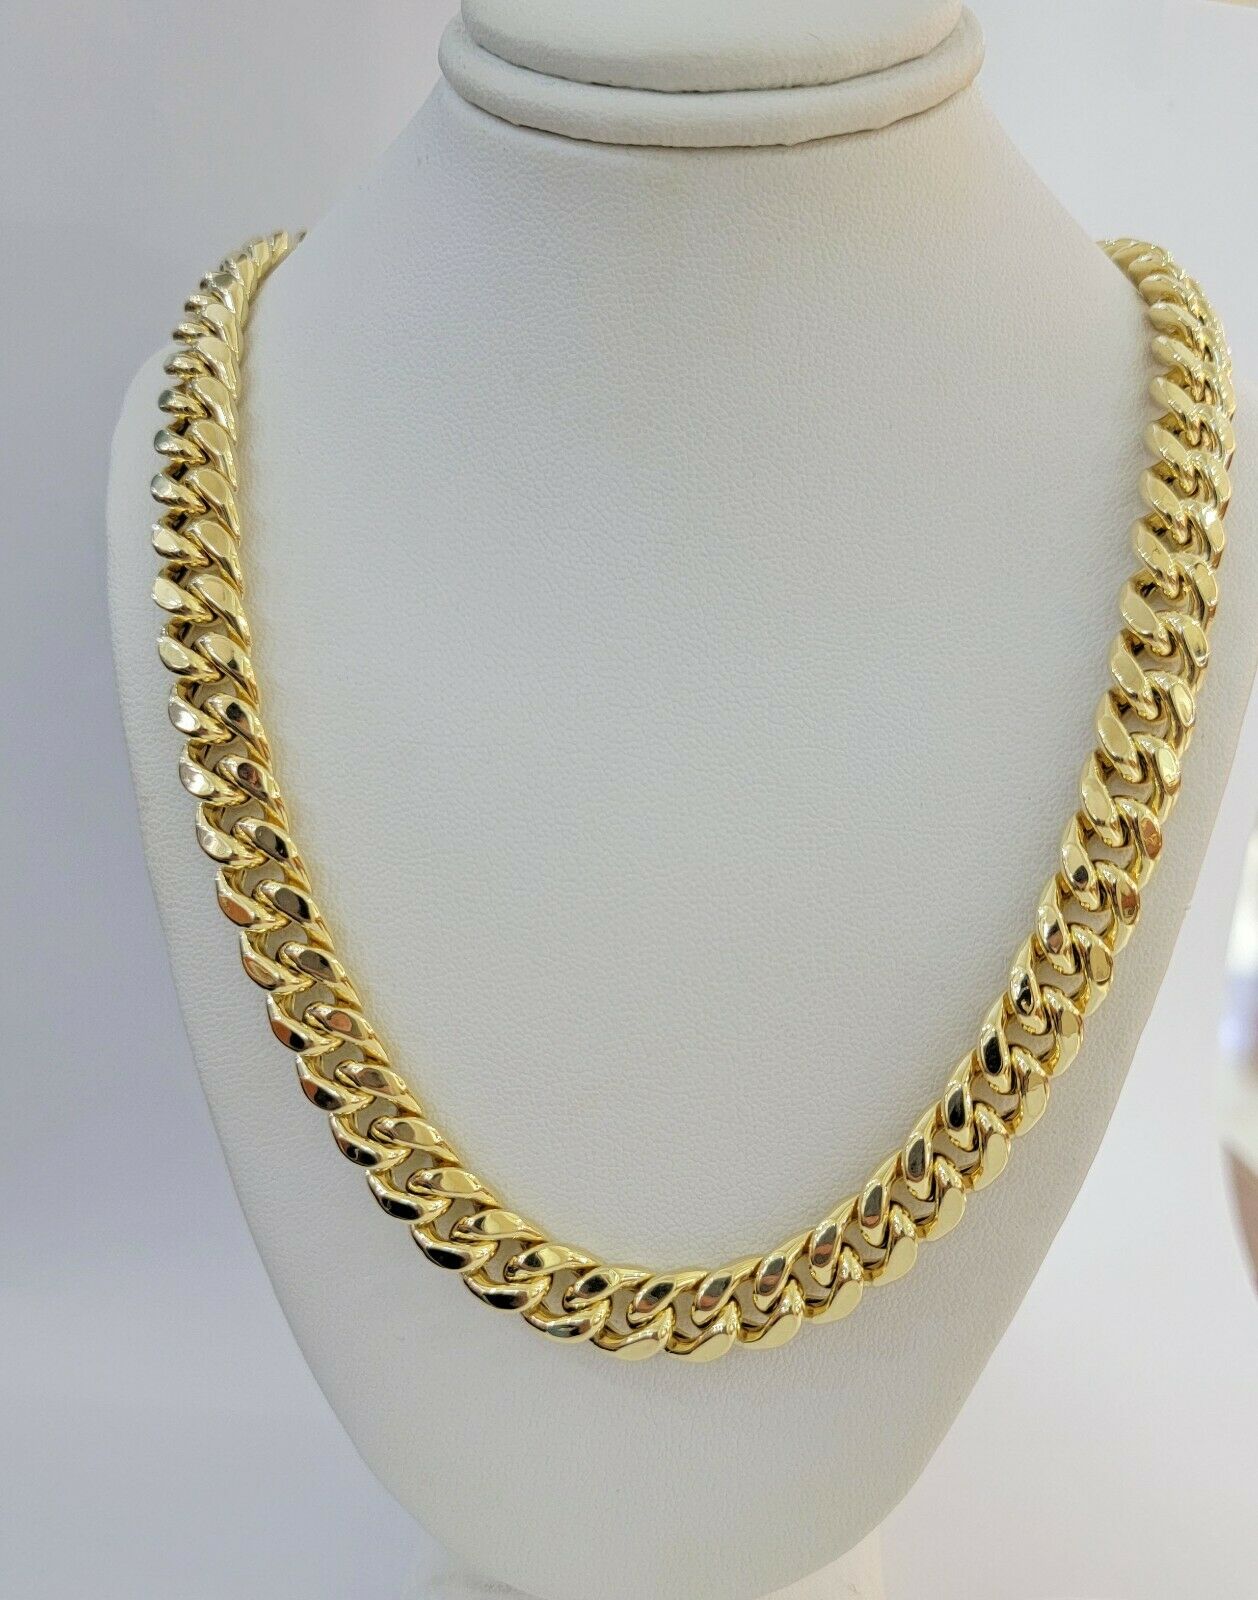 Real 14k Mens Chain Miami Cuban Link Necklace 24"  9mm 14KT Yellow Gold Box lock